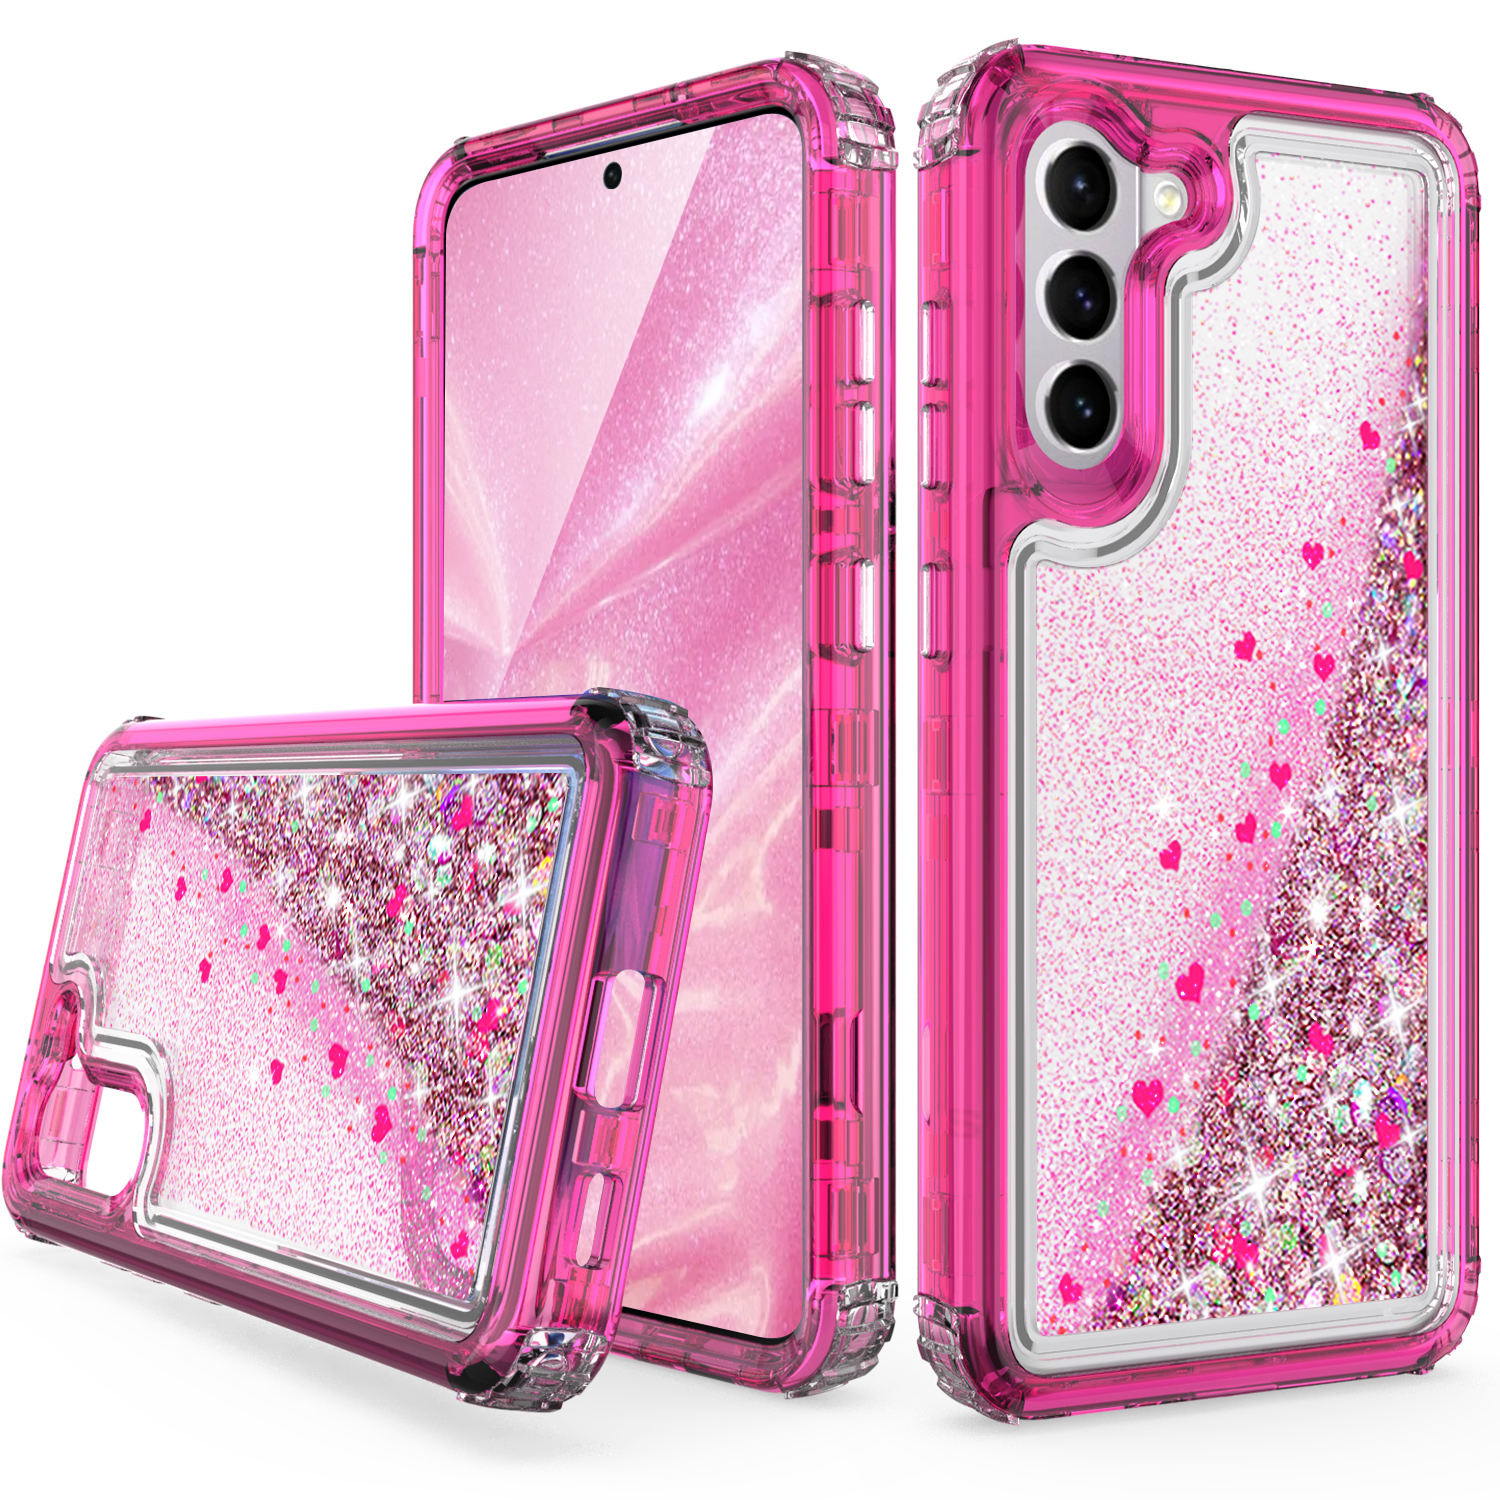 Feasibility beruset Mig selv For Samsung Galaxy S21 FE 5G Clear Phone Case Glitter Sparkle Liquid Bling  Cover | eBay